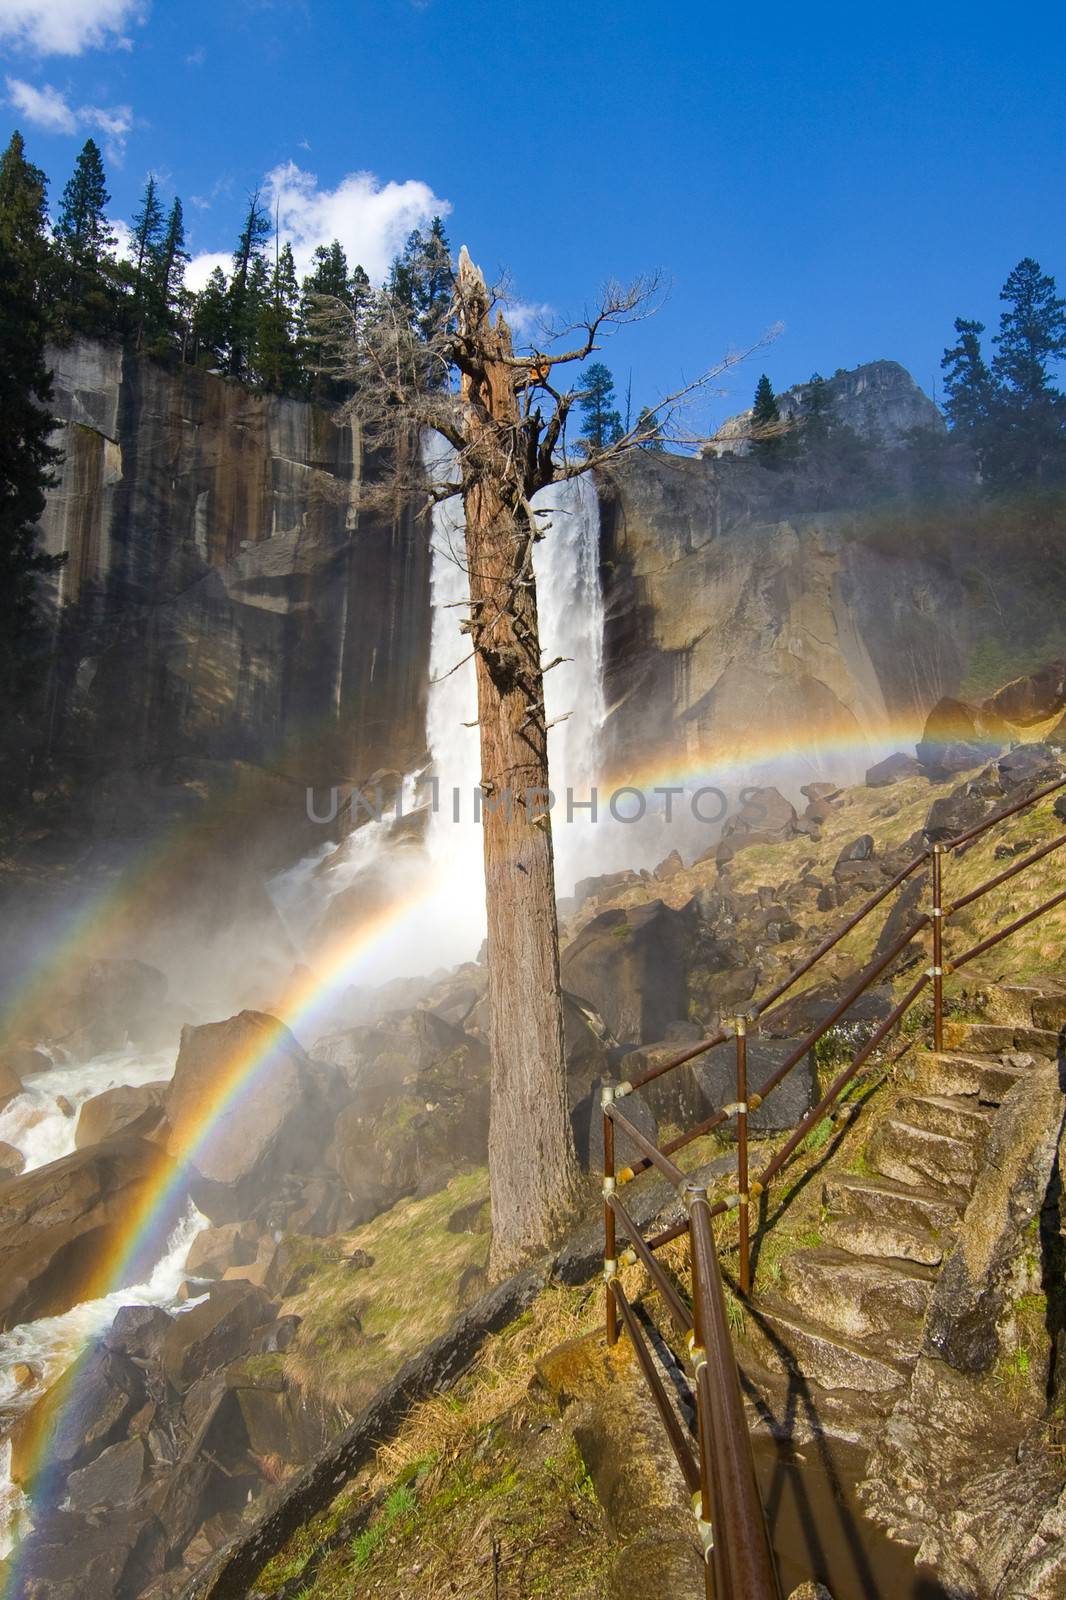 Rainbows on the Mist Trail, a one mile long slippery route through the spray of the Vernal Fall in Yosemite National Park.